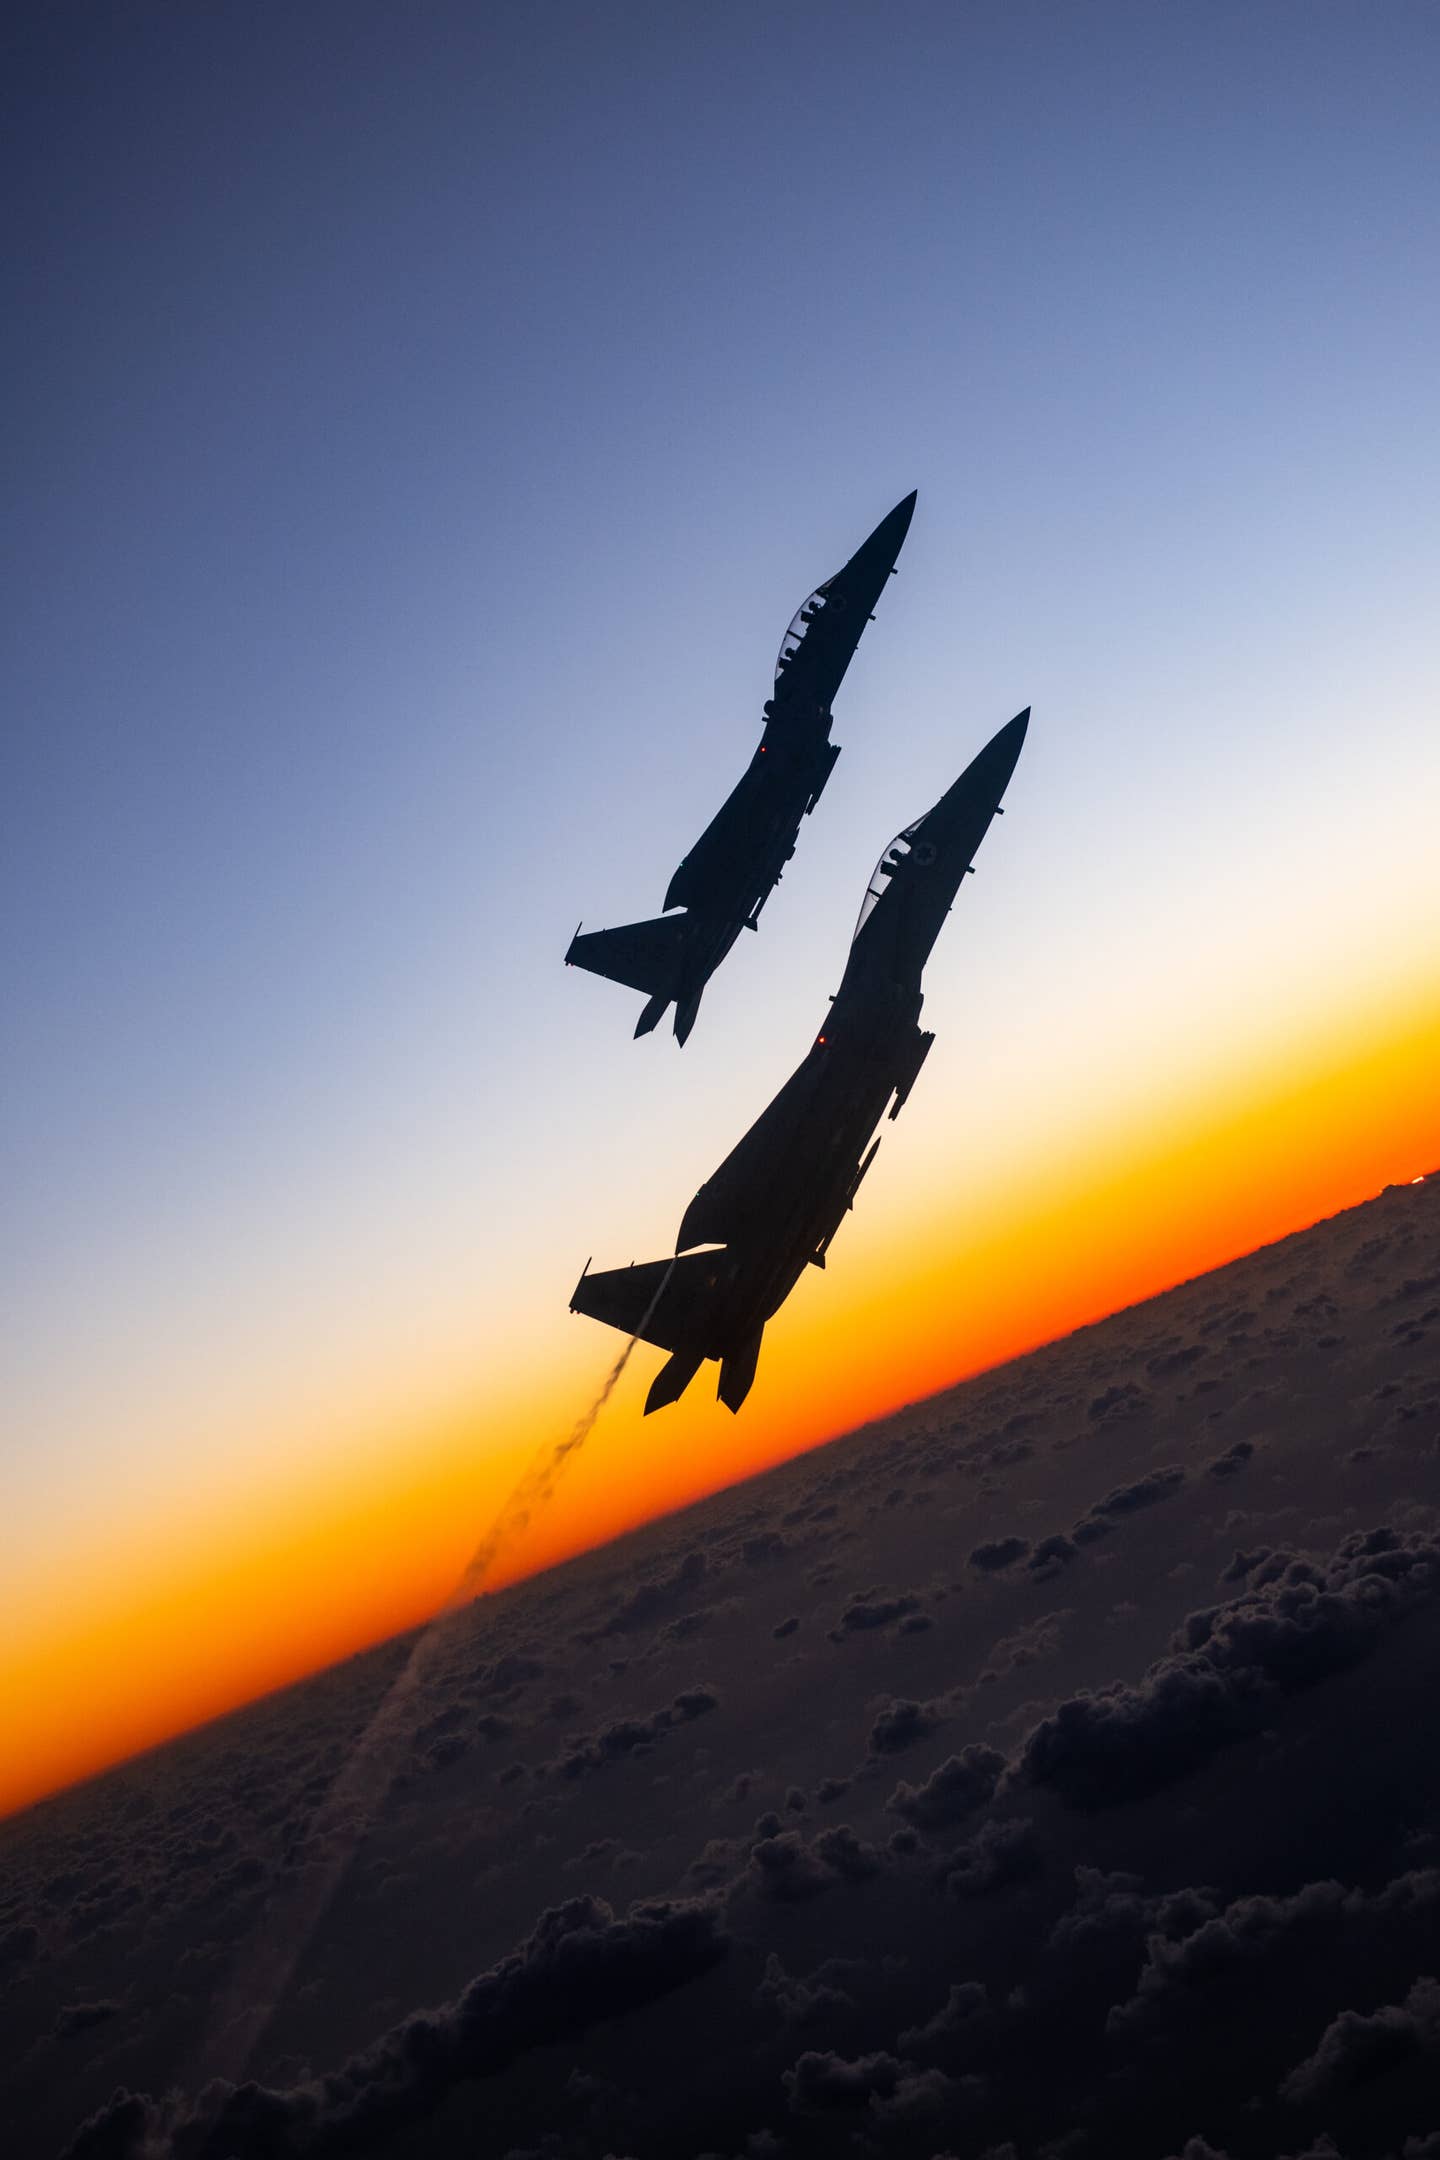 These Are The Best Photos Of Israeli F-15 &#8216;Baz&#8217; Eagles We’ve Ever Seen